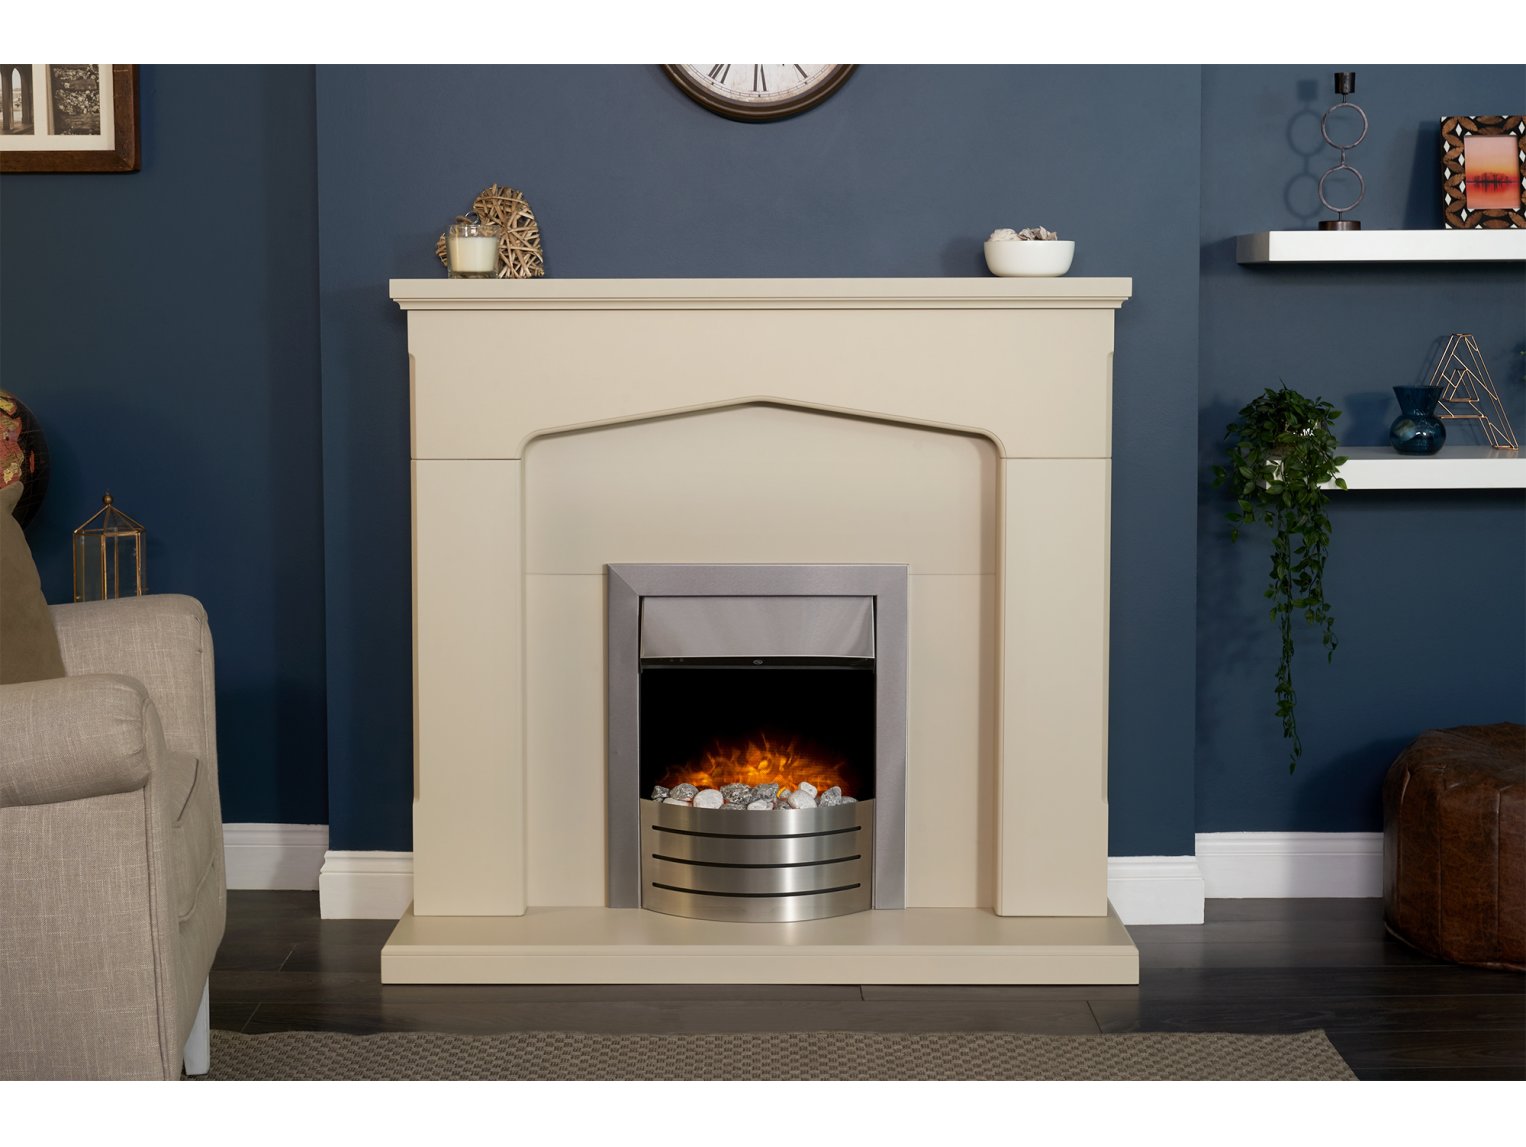 Adam Cotswold Fireplace Stone Effect + Comet Electric Fire Brushed Steel, 48"